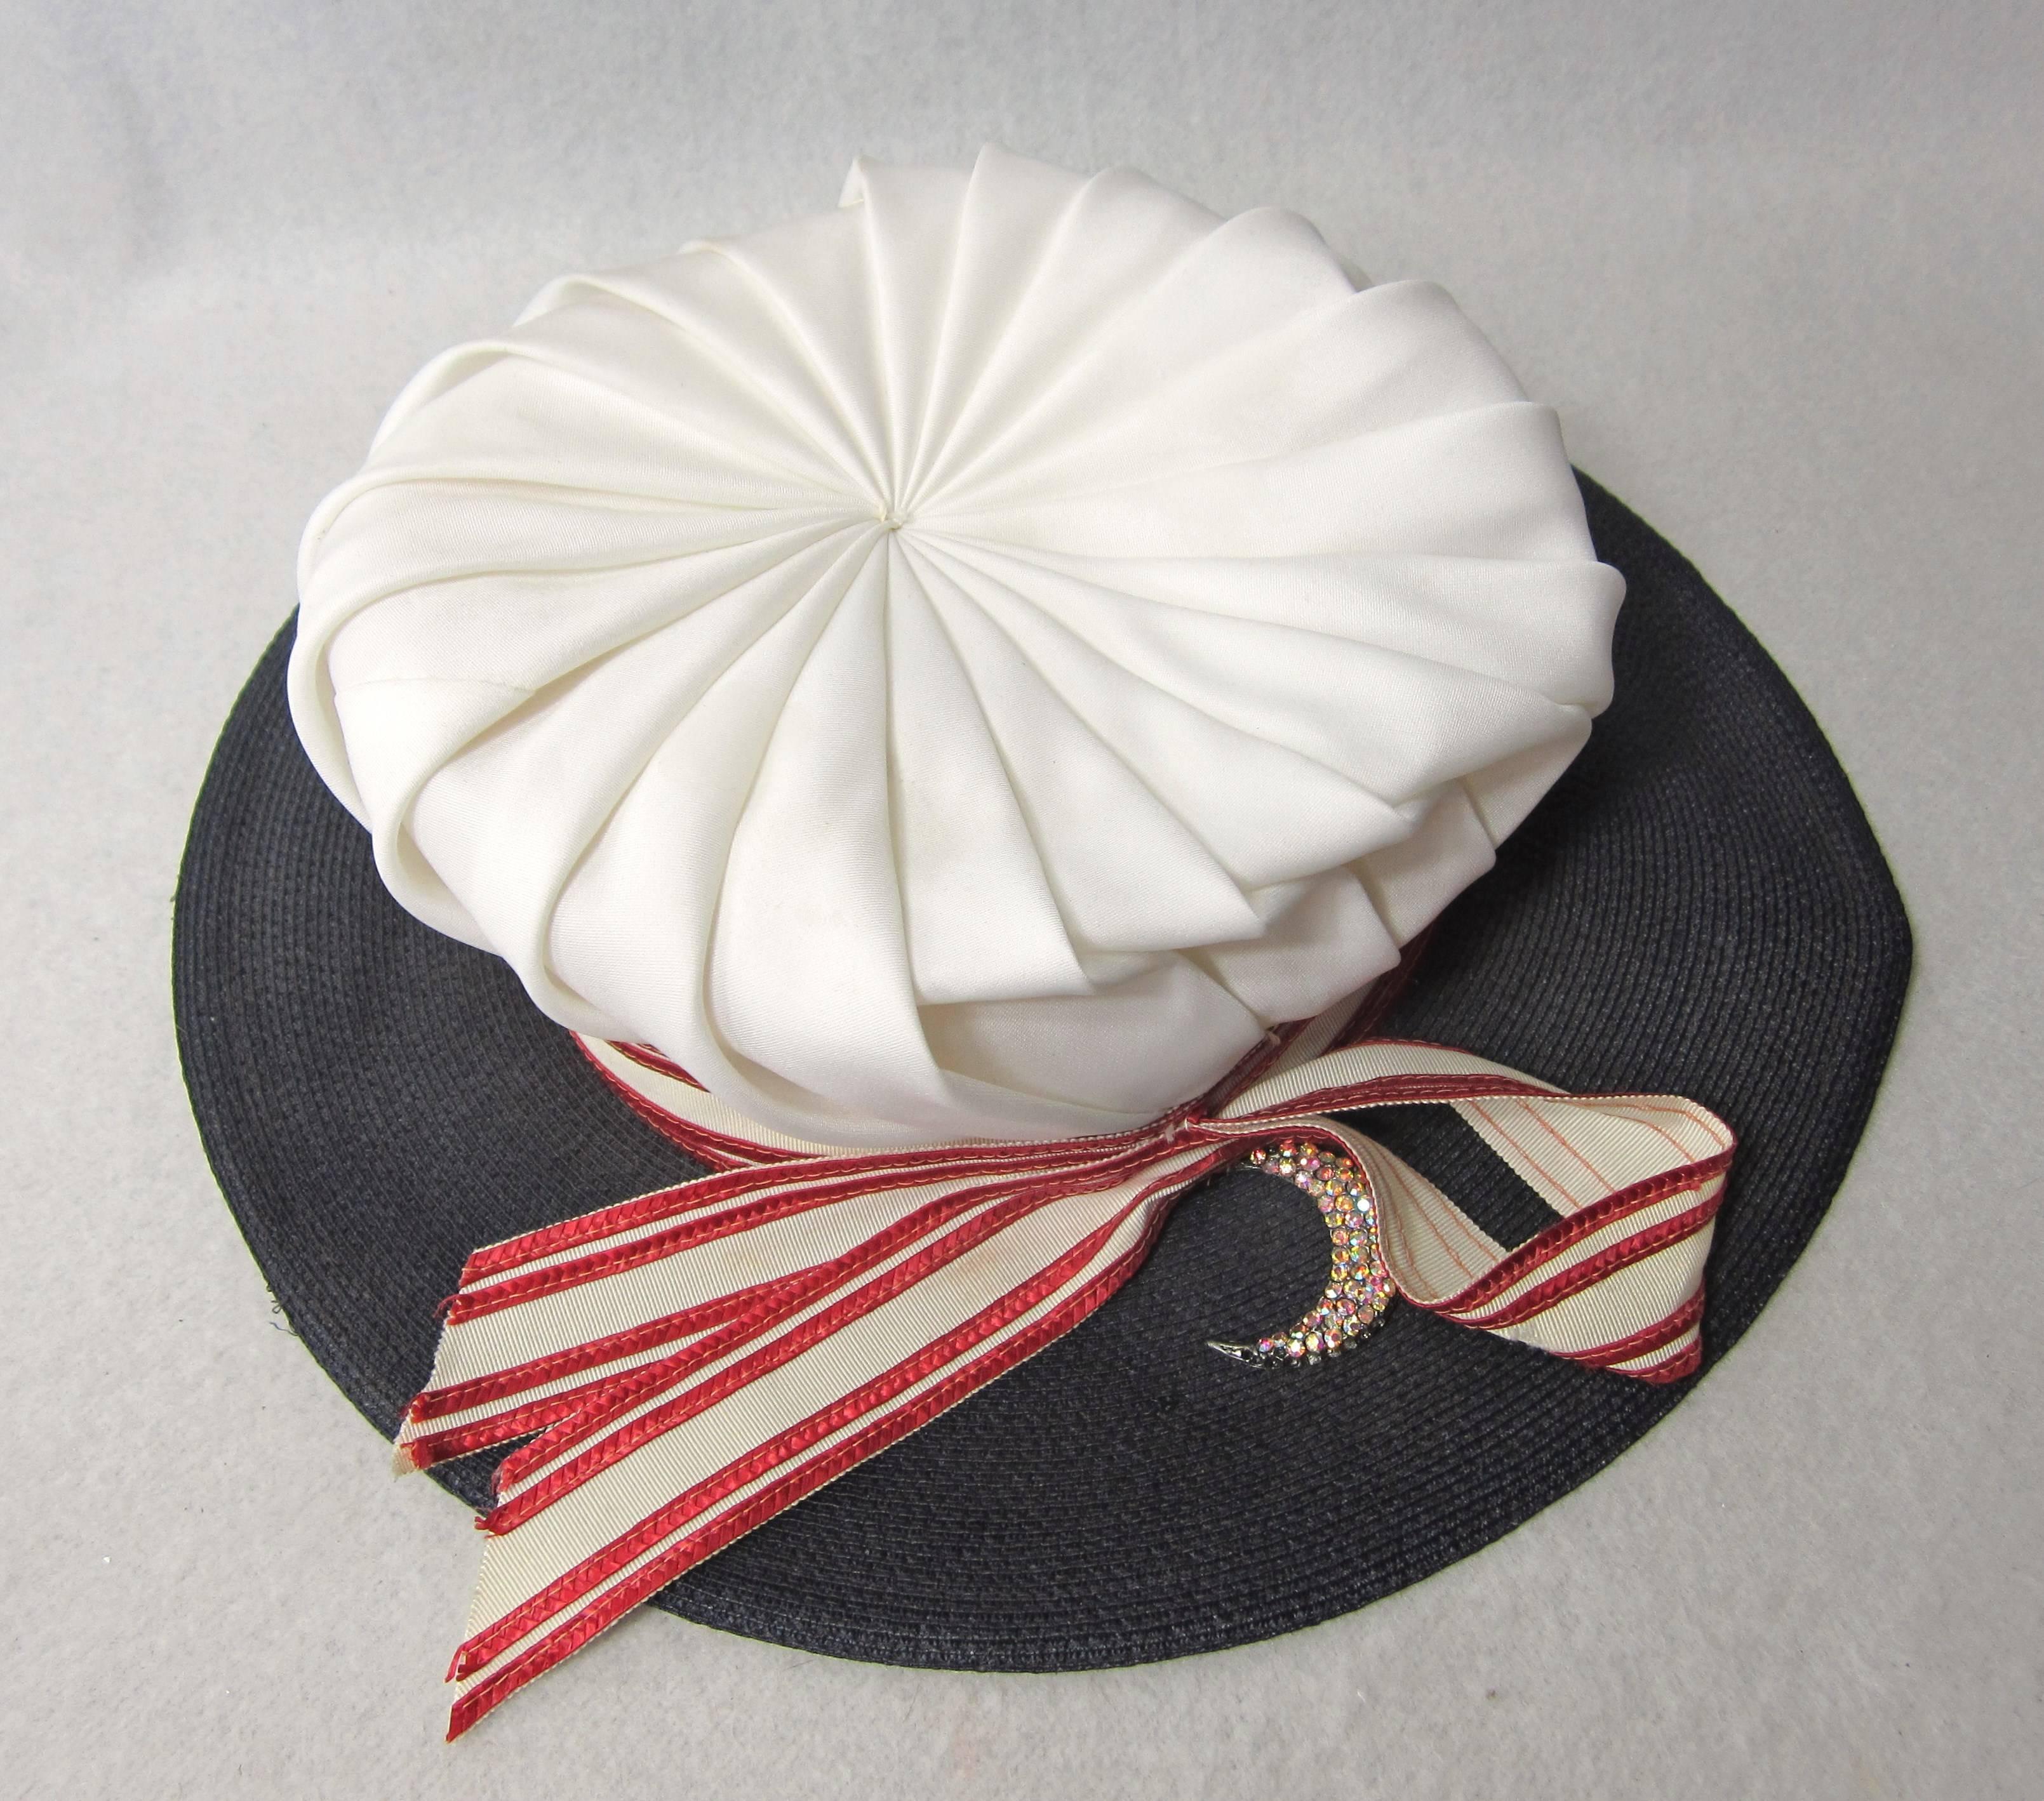 This is a show shopper!. Paul Bensam White topped Accordion pleated with Red and White Wide Ribbon and Blue Straw brim. It comes with a Crescent moon pin attached. The hat is approximately  7-1/4. 4.75 inch Brim. Sits up 4 inches. We have been